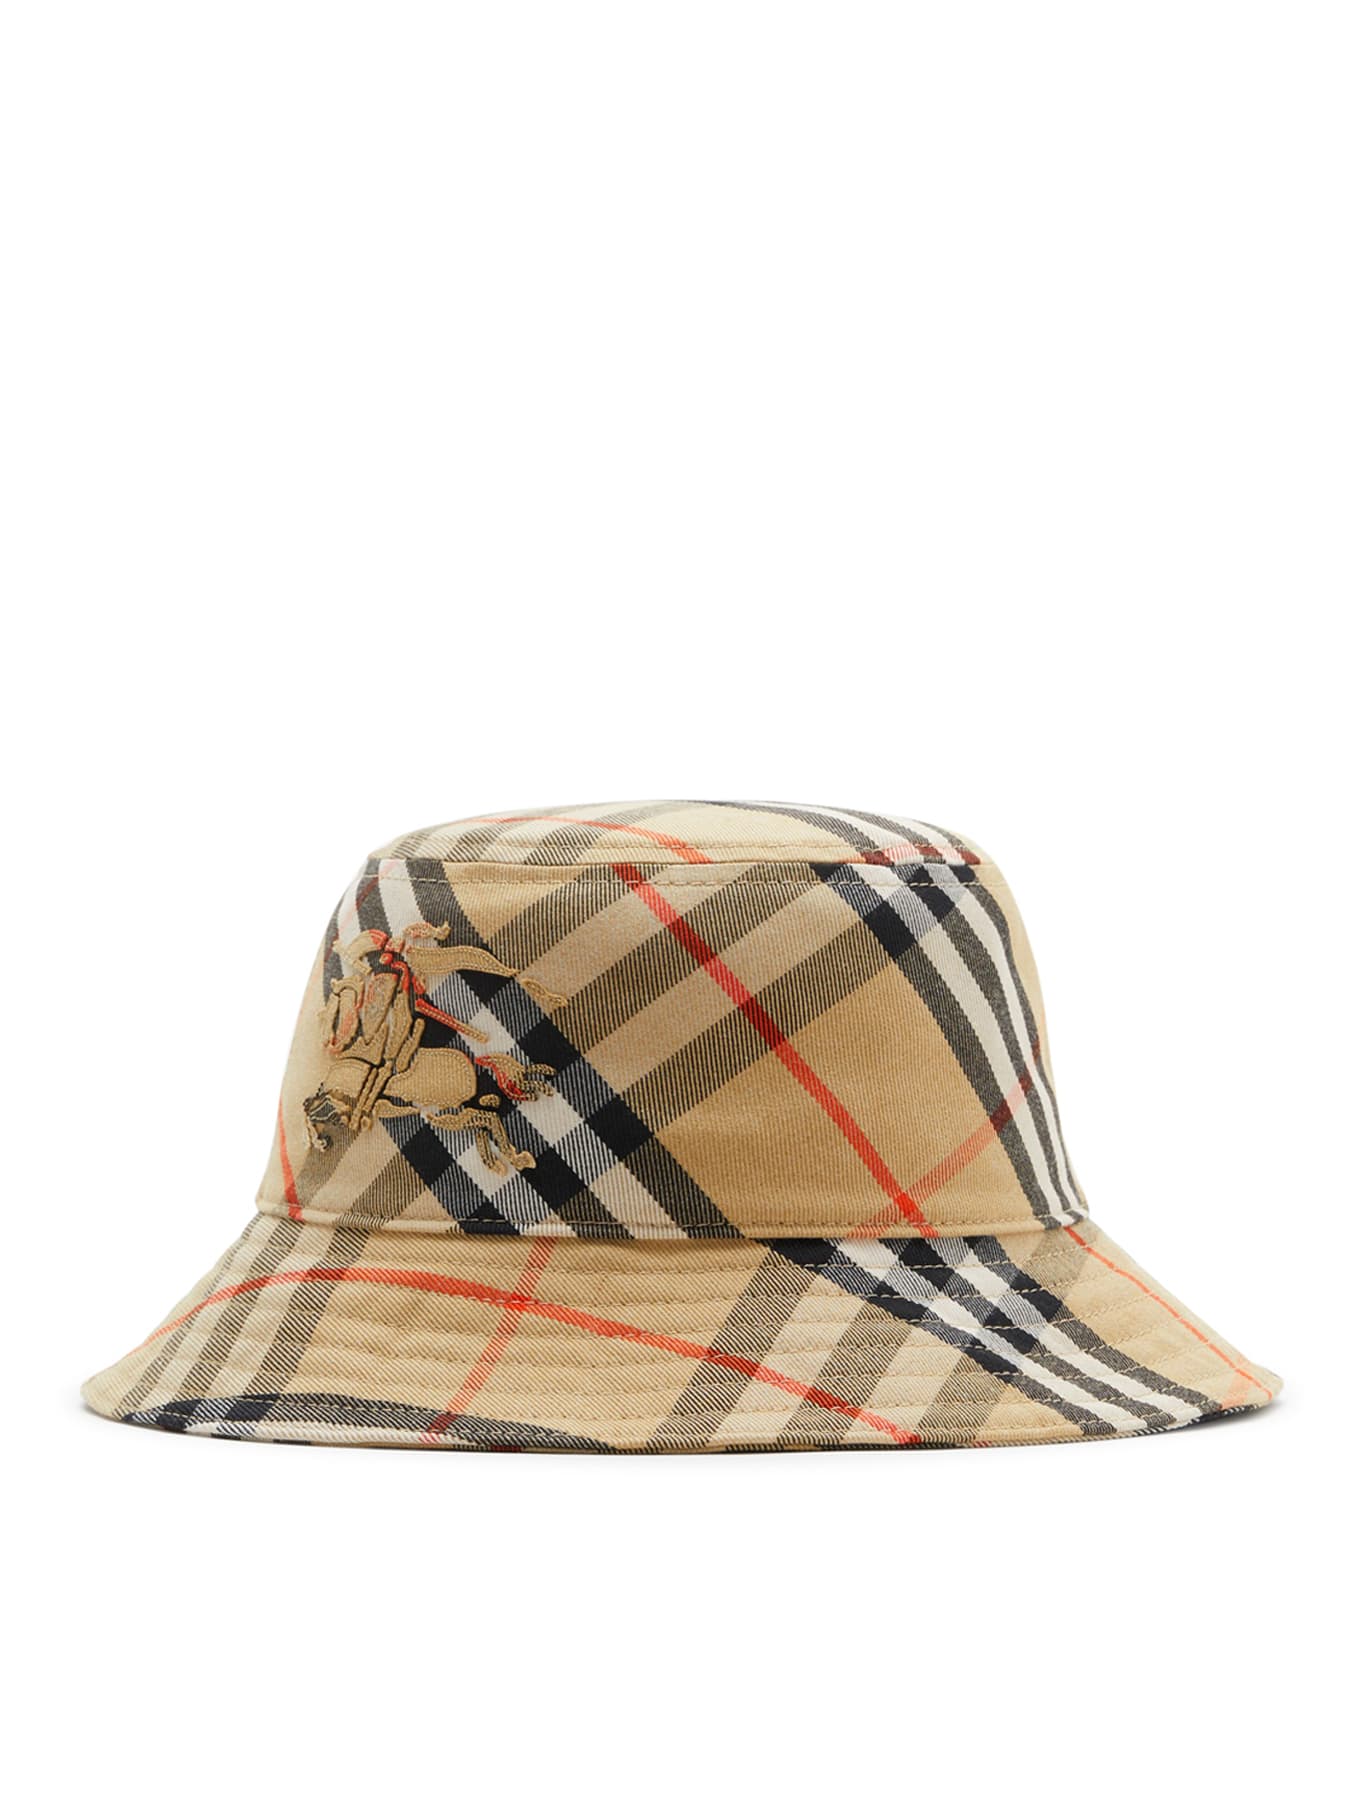 Burberry Mh Bias Check Bucket In Sand